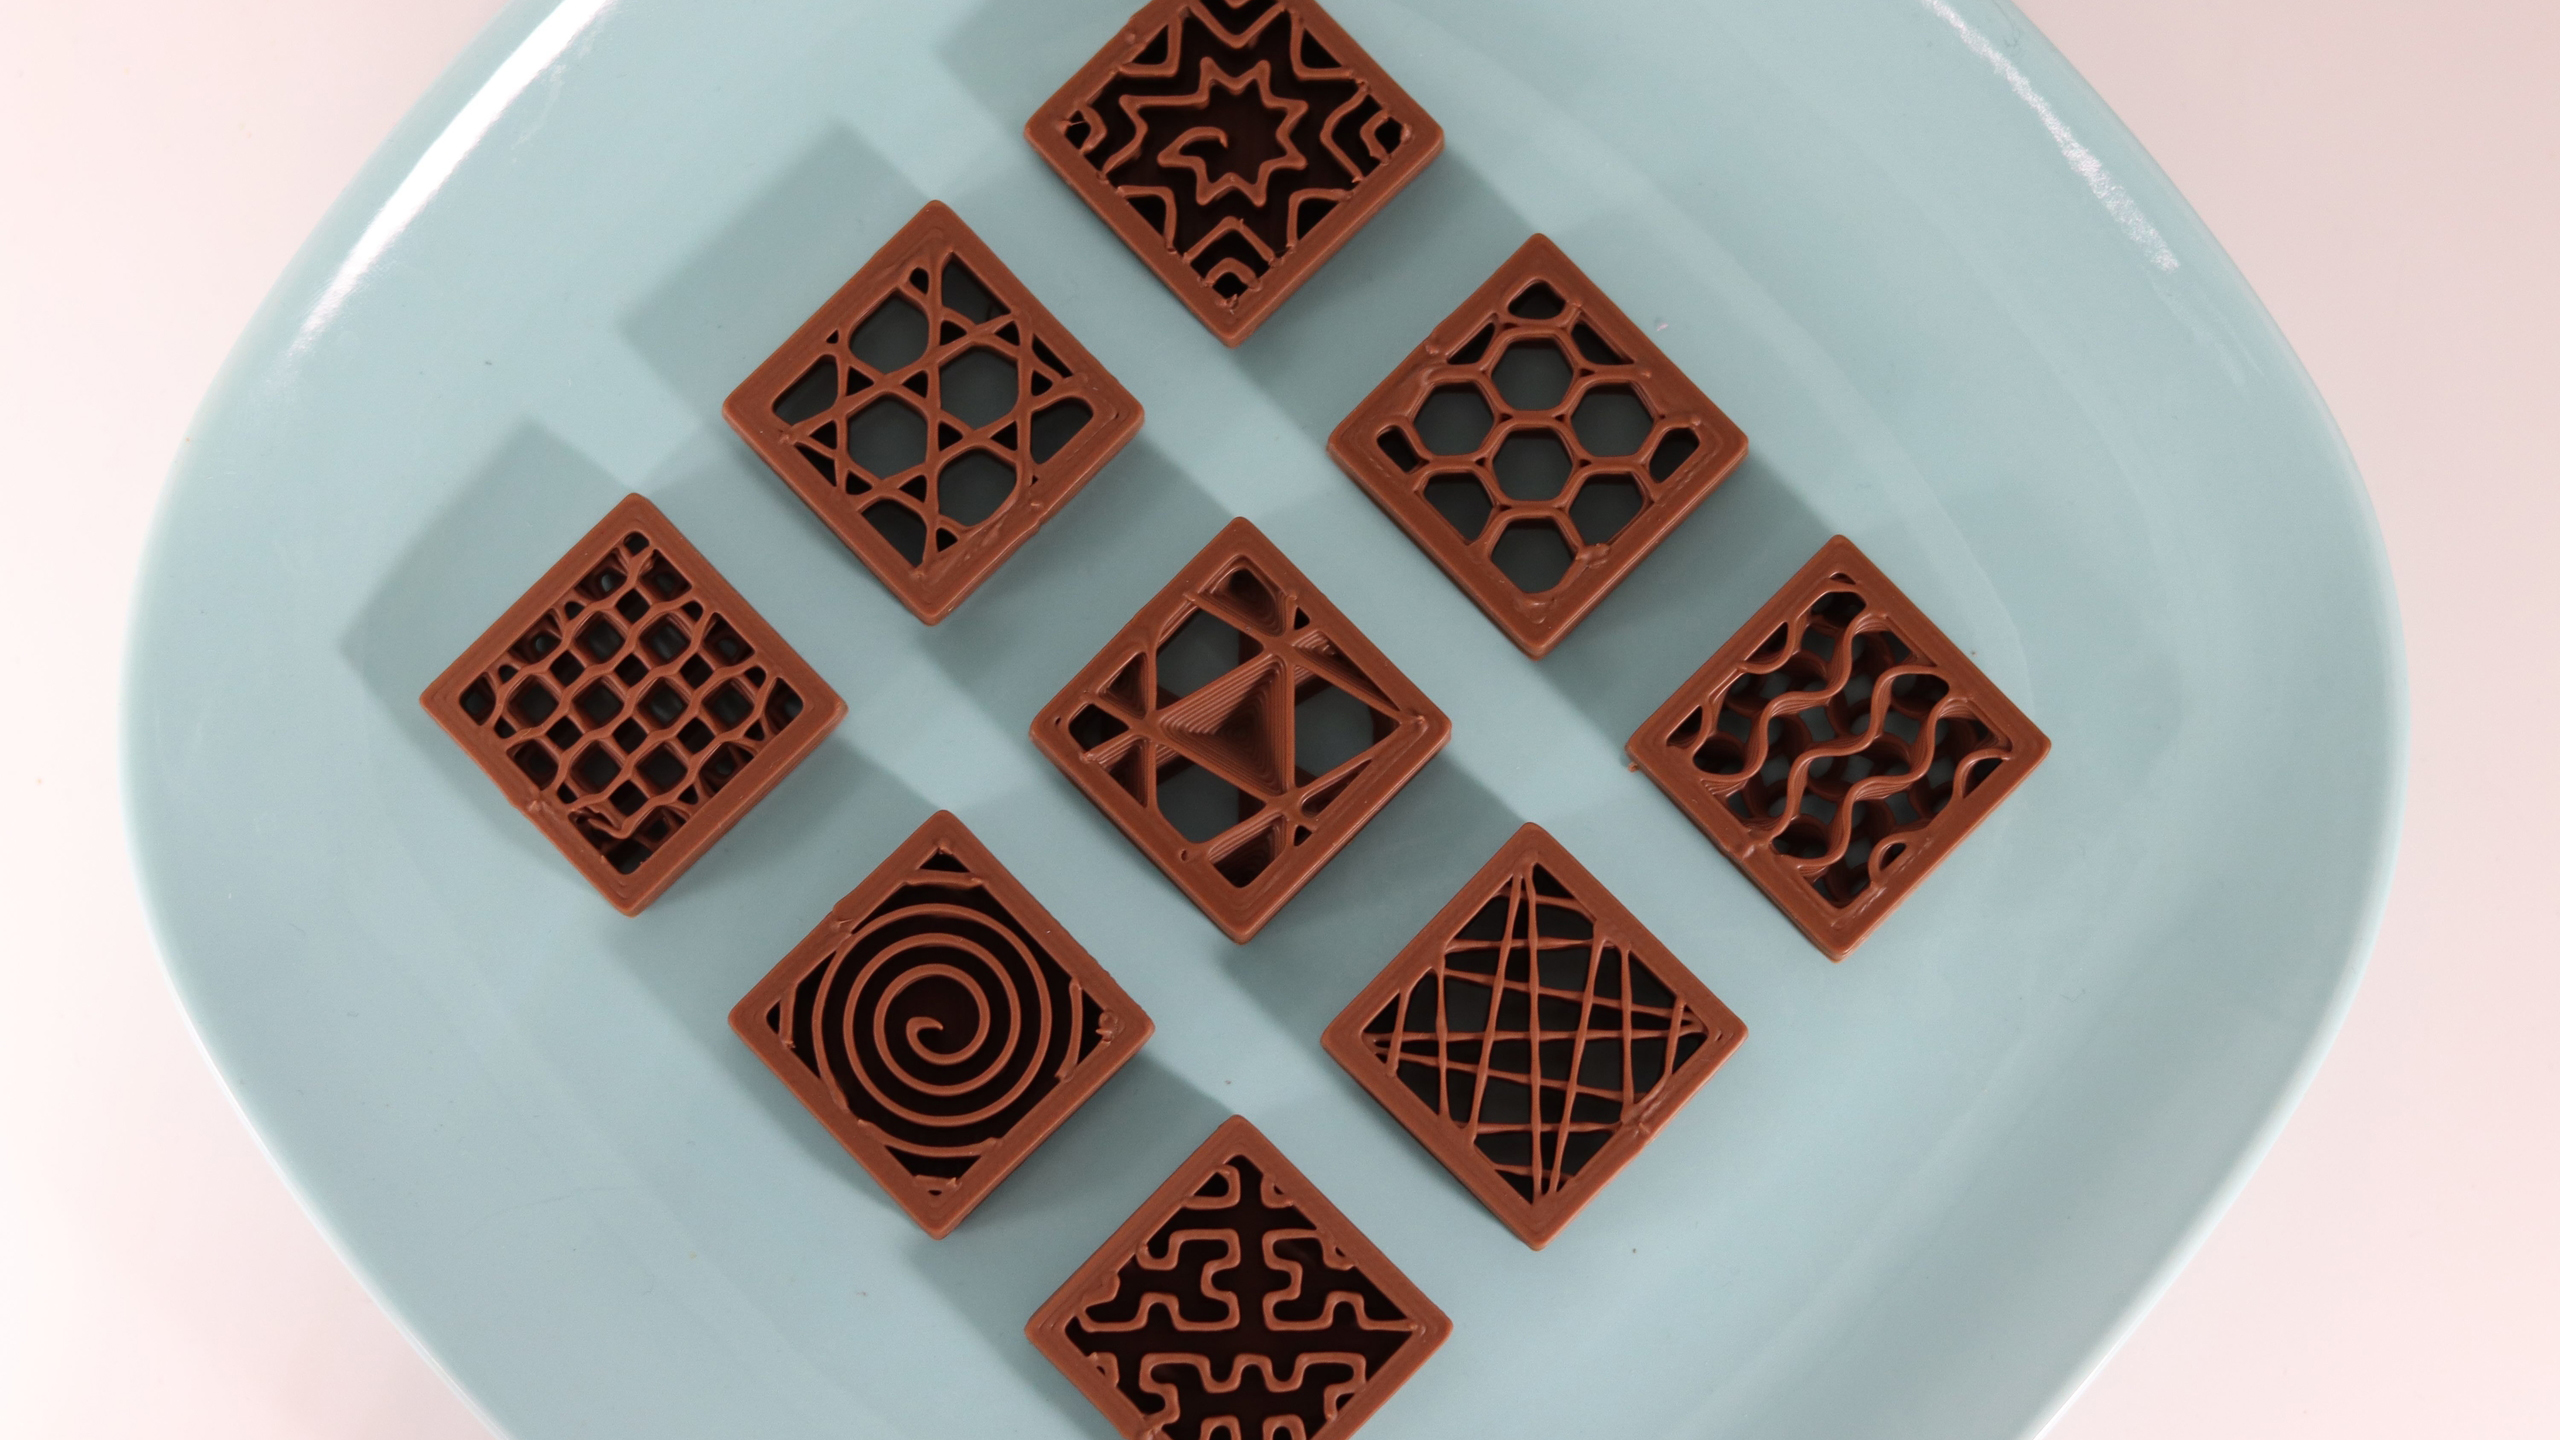 This chocolate 3D printer is pretty sweet – but isn’t cheap